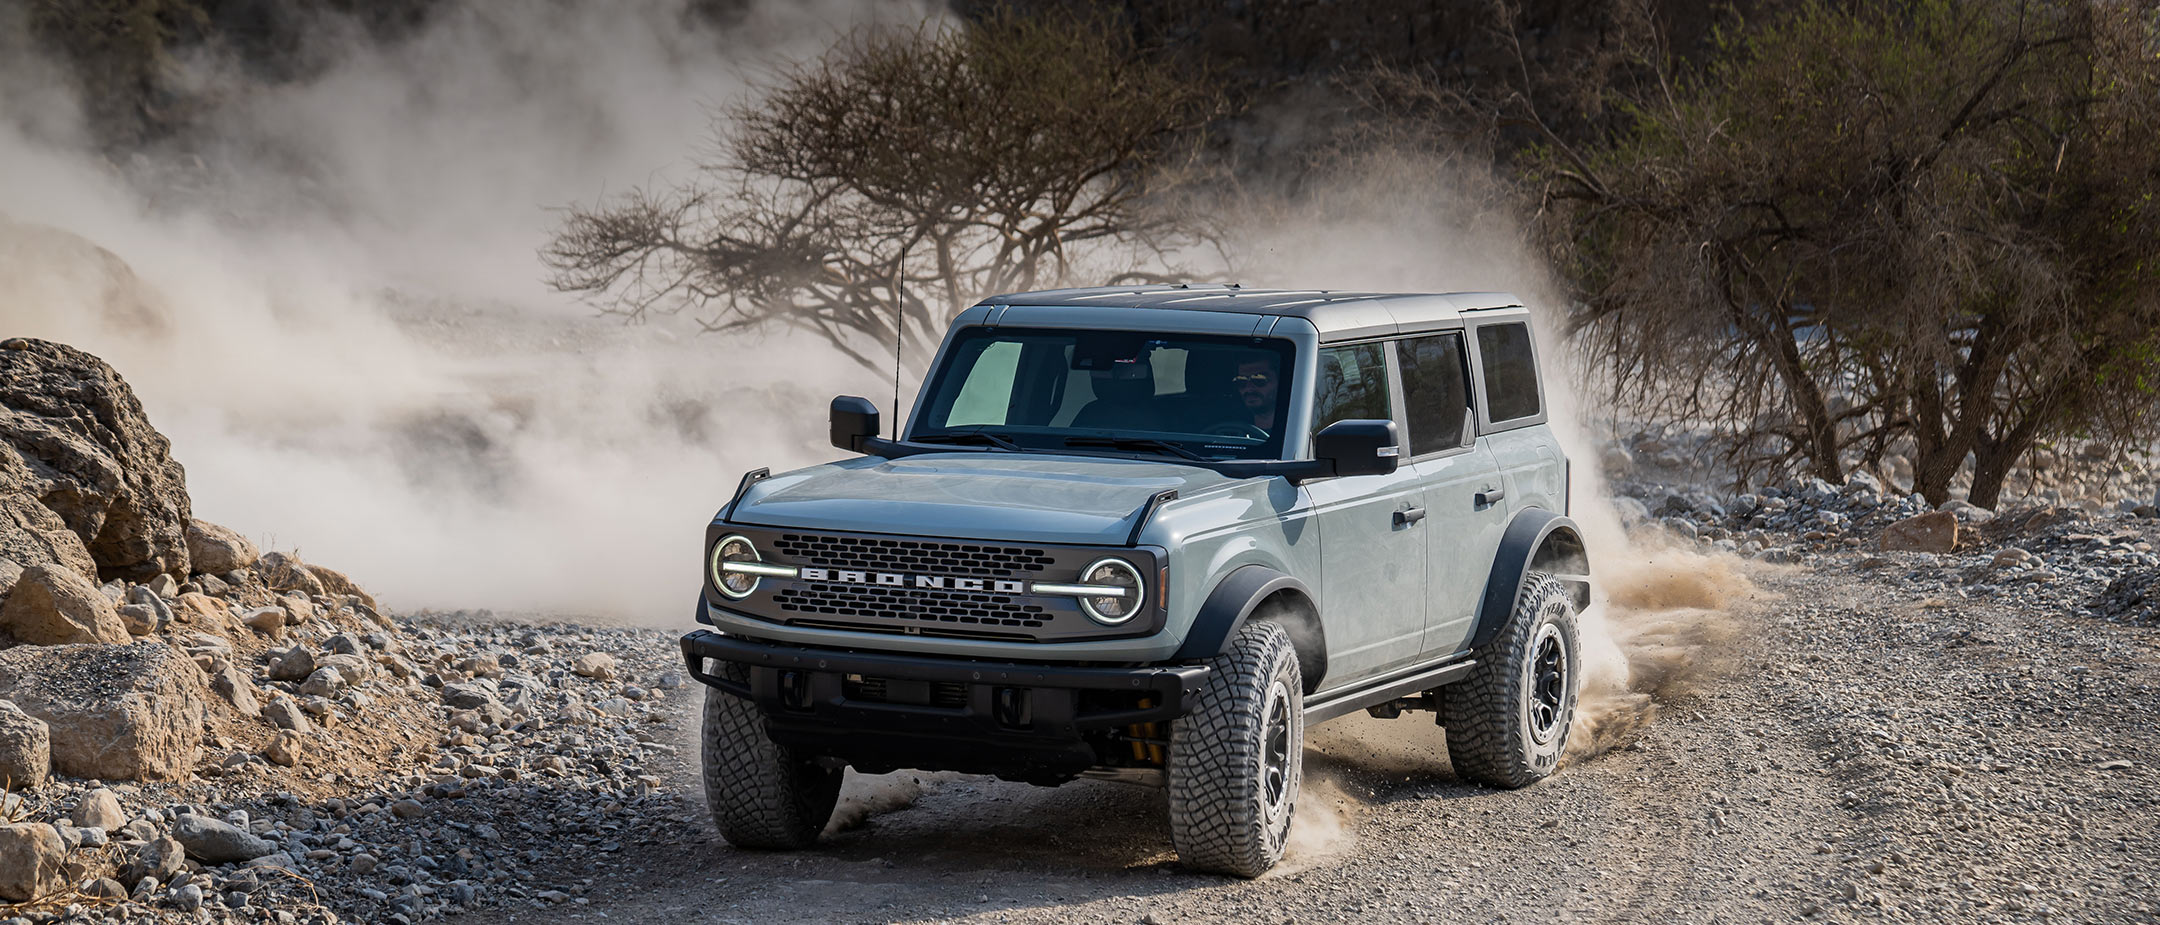 Ford Bronco driving off-road